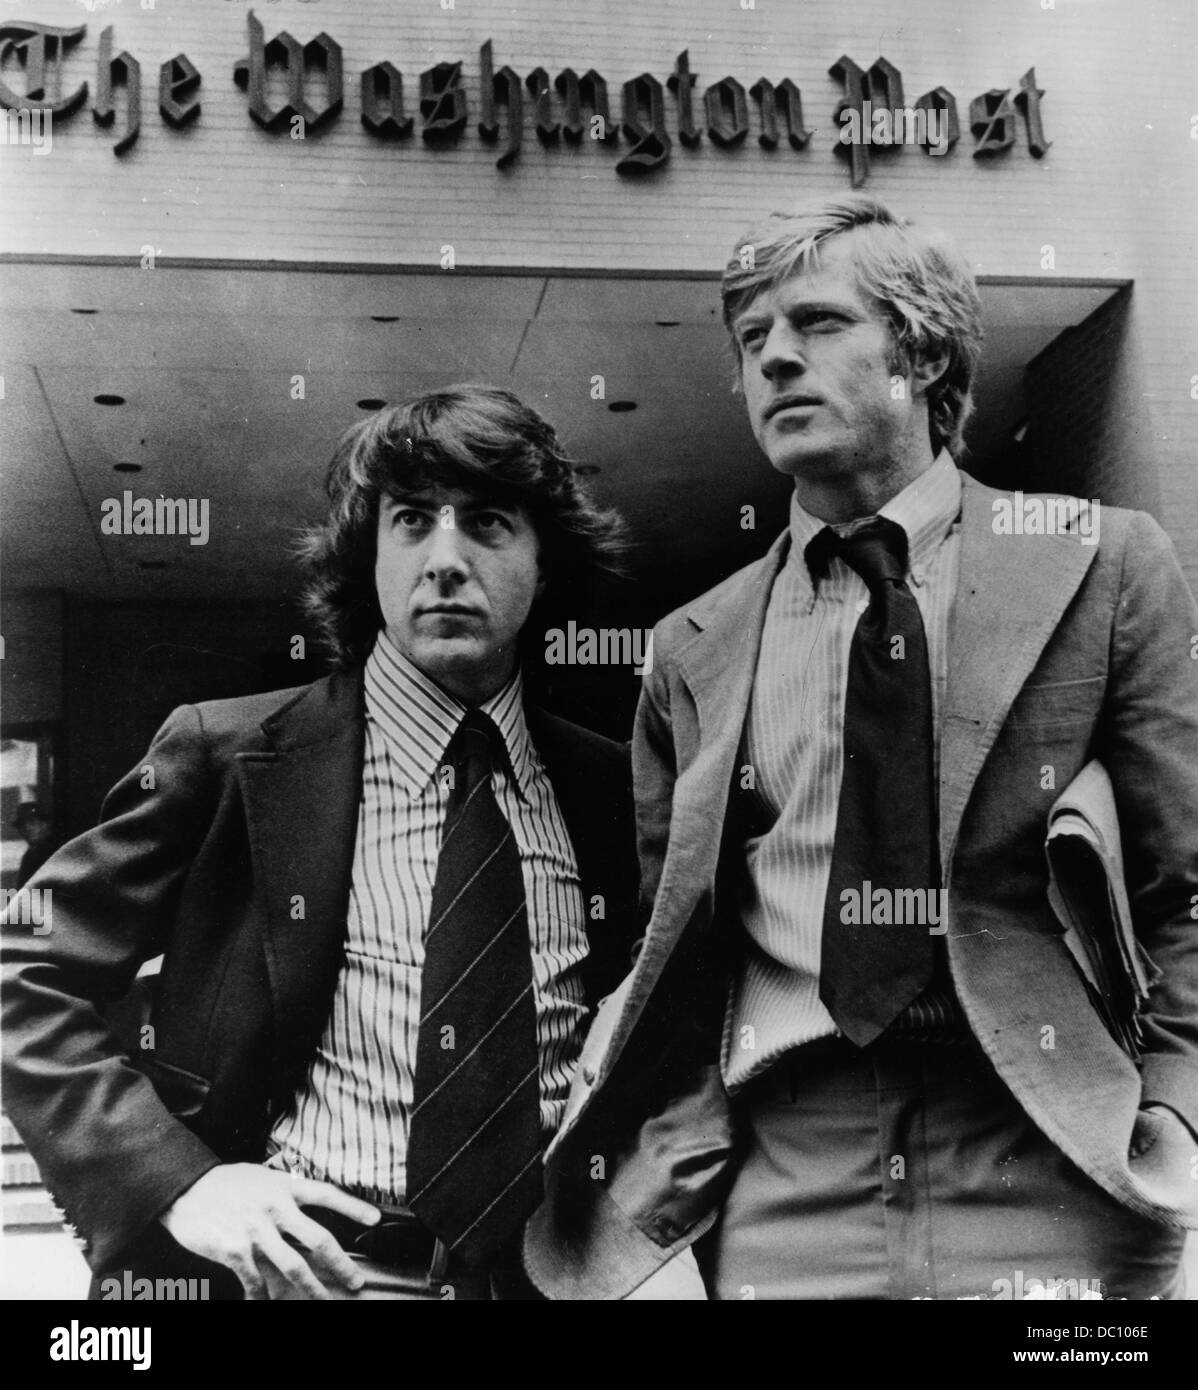 PICTURED: Feb. 2, 1976 - Washington D.C. U.S. - Actors DUSTIN HOFFMAN and ROBERT REDFORD outside the Washington Post, as they co-star in a scene from the film, 'All the President's Men.' (Credit Image: © KEYSTONE Pictures USA/ZUMAPRESS.com) Stock Photo